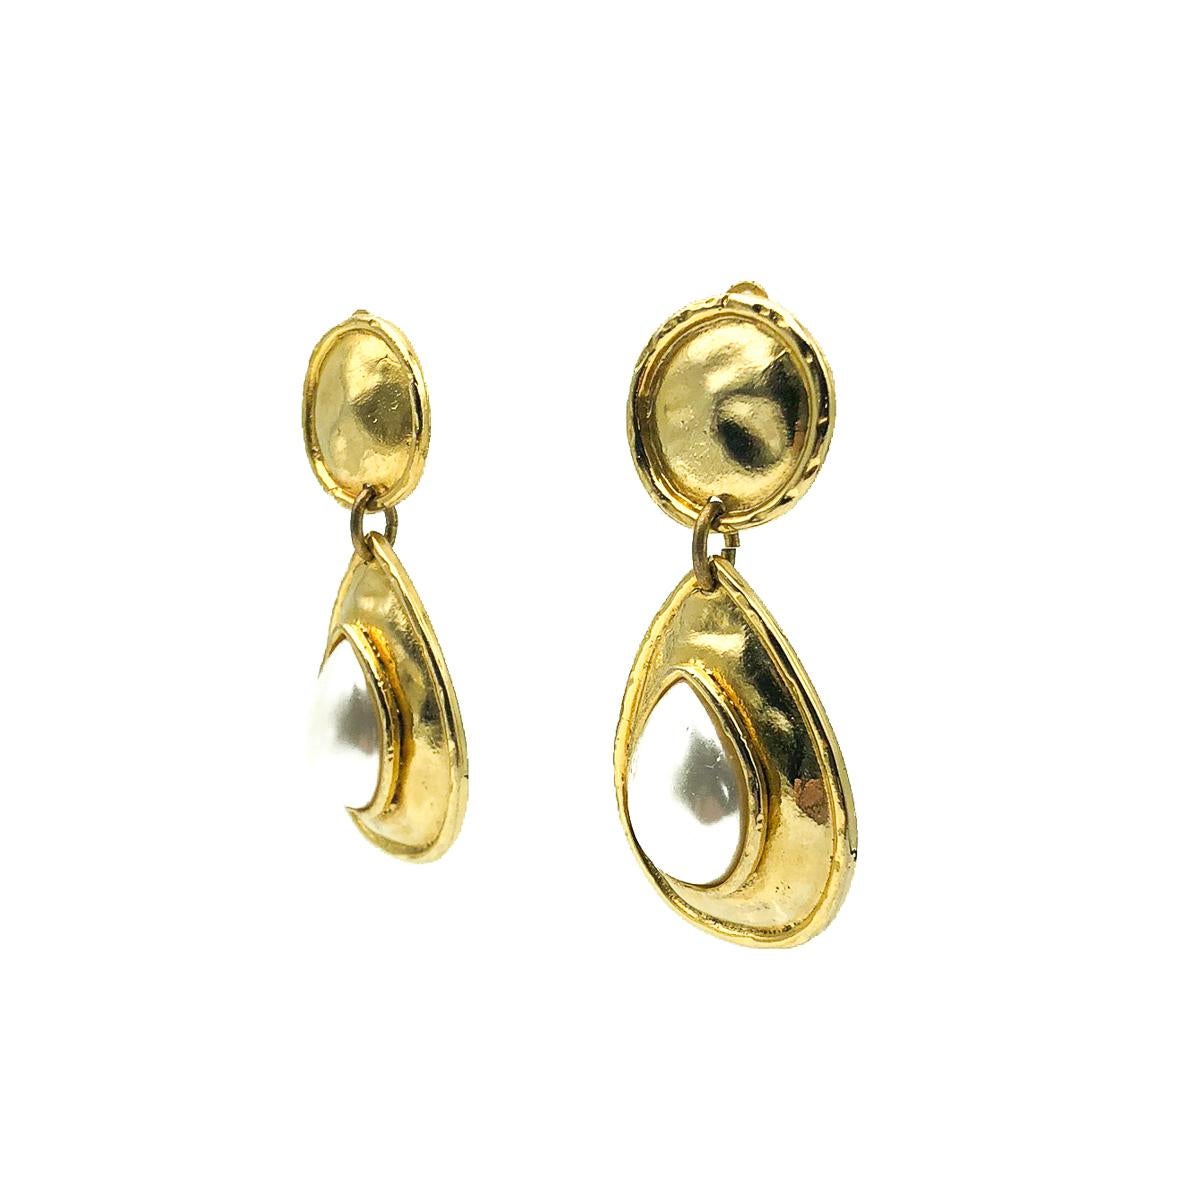 Vintage Edouard Rambaud Pearl Earrings. Crafted in hammered gold plated metal with large teardrop faux pearls. Very good vintage condition, signed, 8cms. An exquisite pair of French designer earrings that will always raise your game and easily